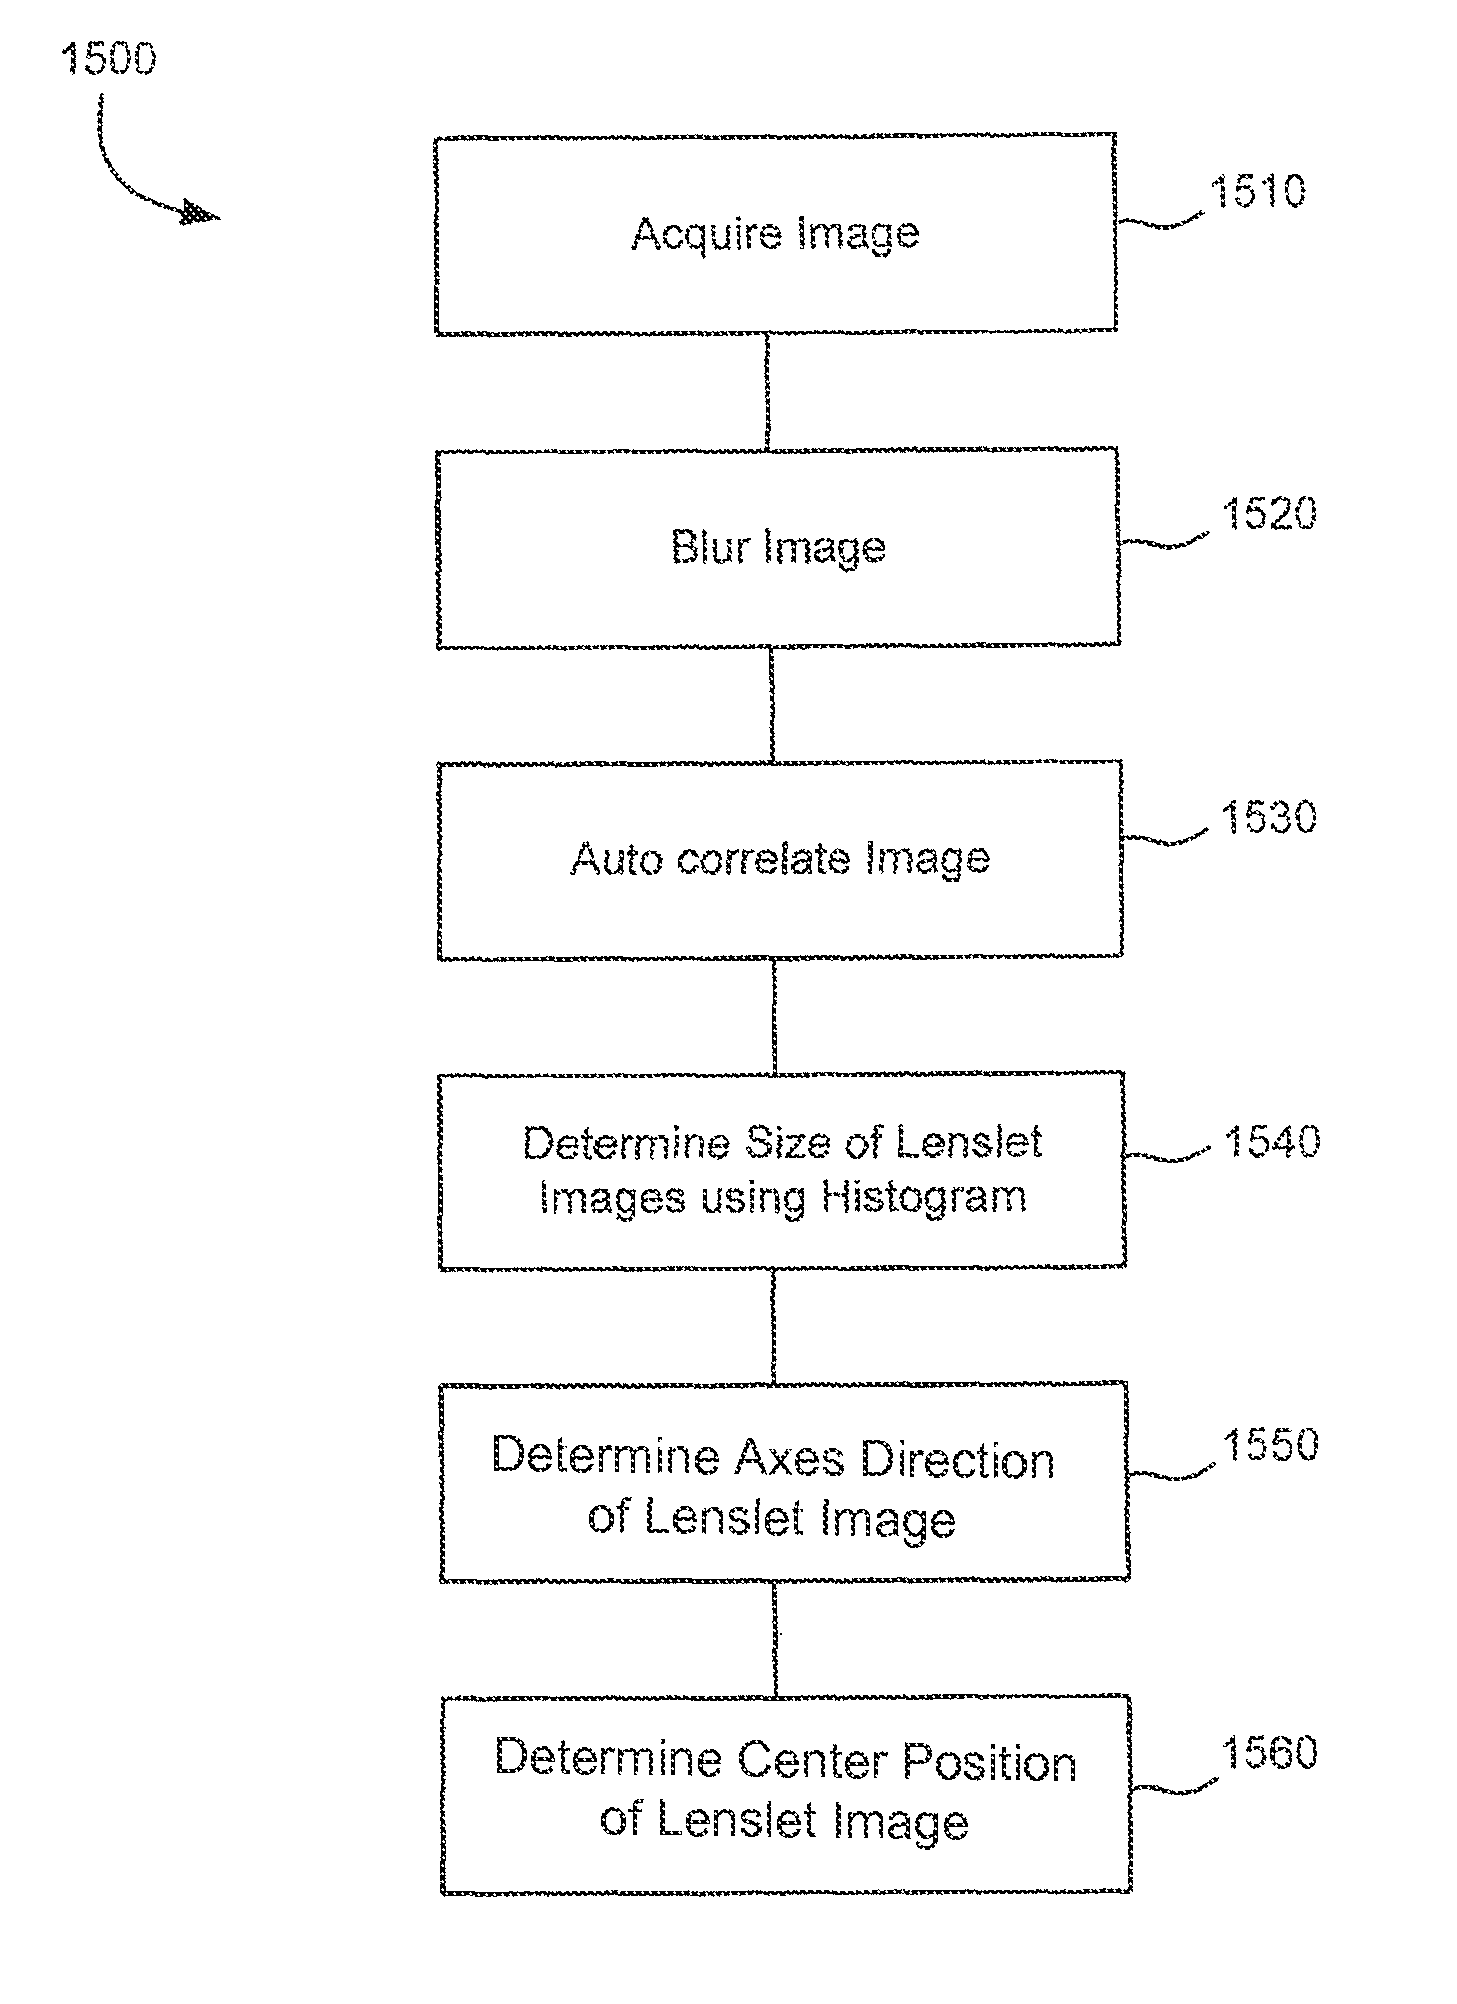 Super light-field lens and image processing methods